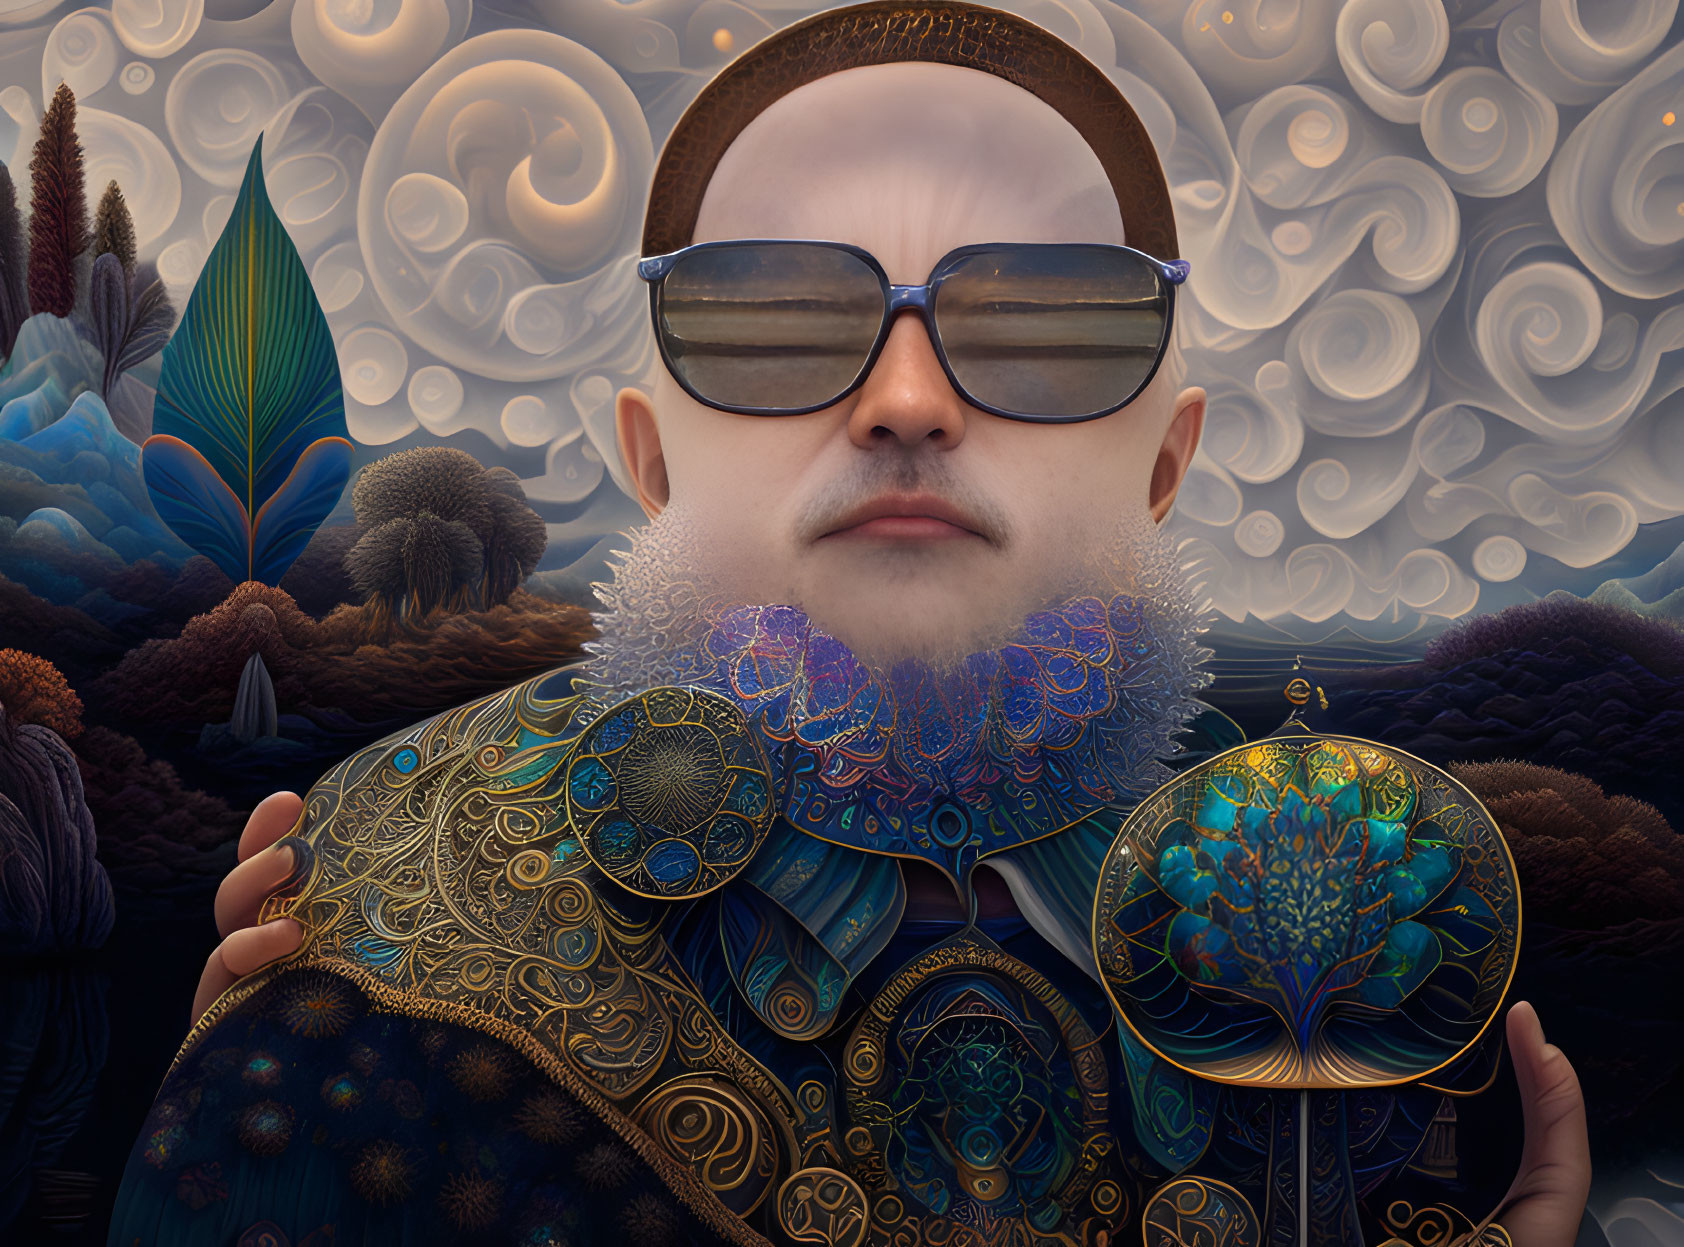 Stylized portrait of man with patterned beard and sunglasses